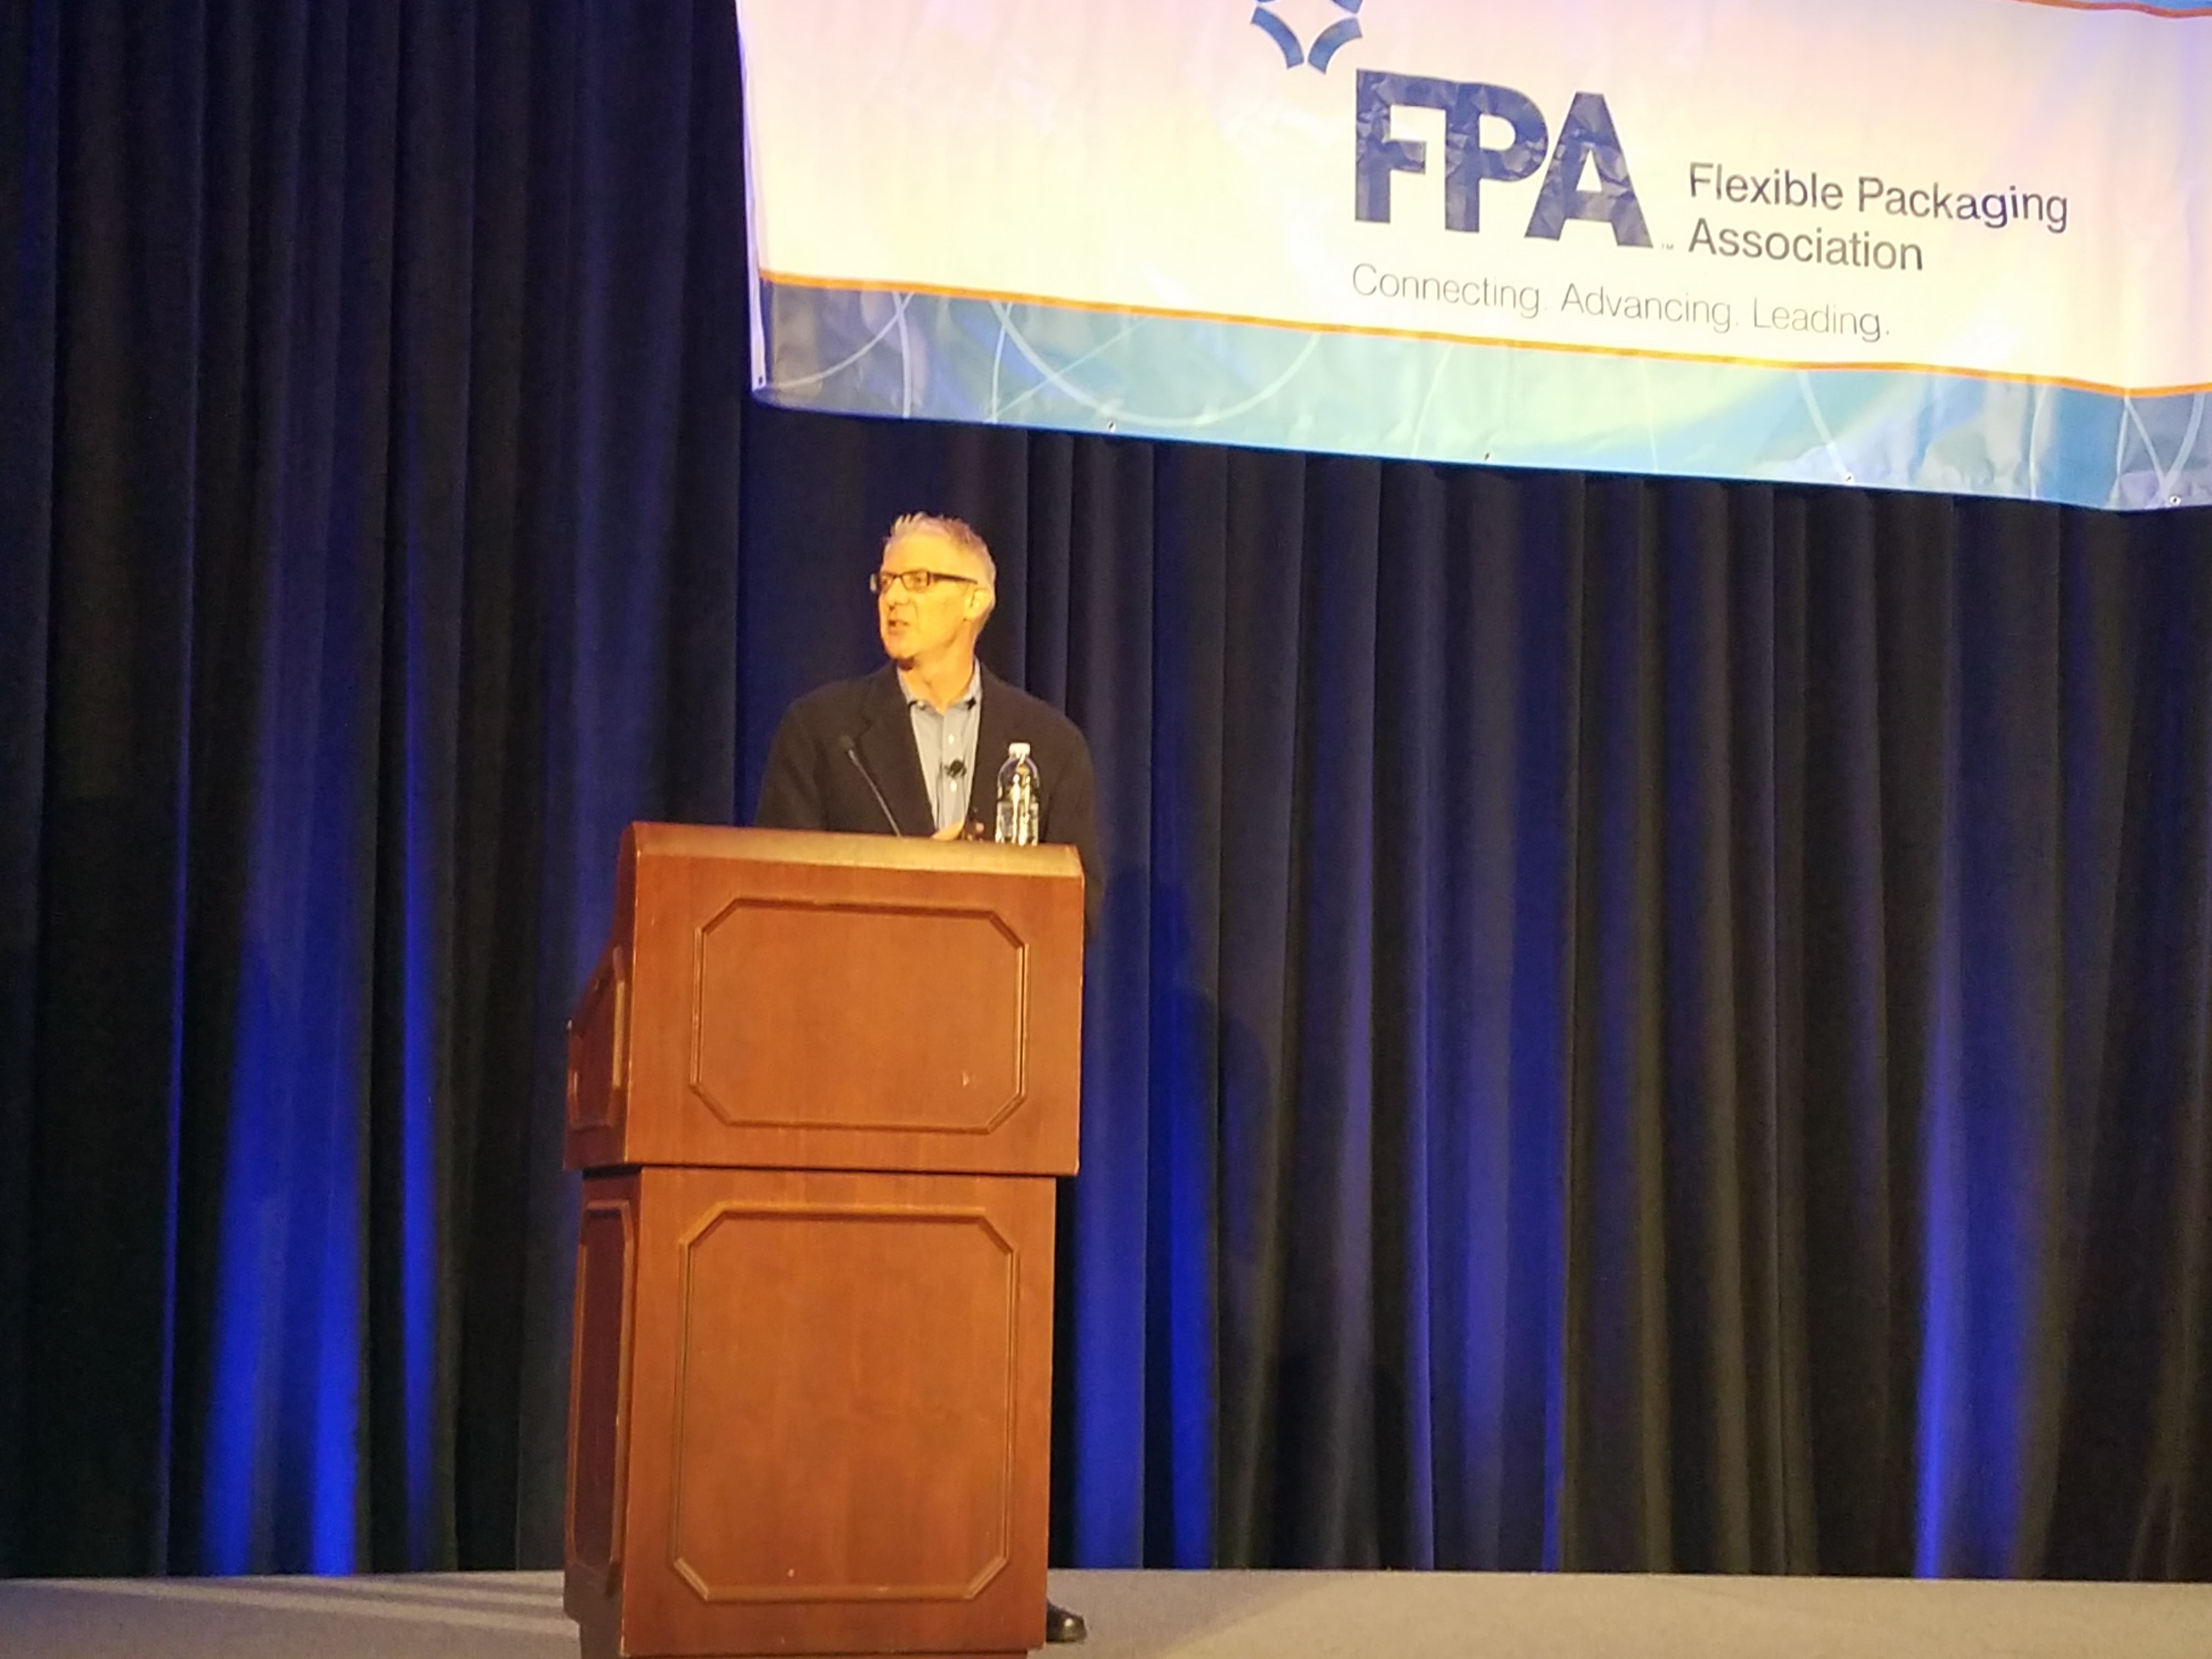 FPA Annual Meeting Showcases Opportunities in Flexible Packaging